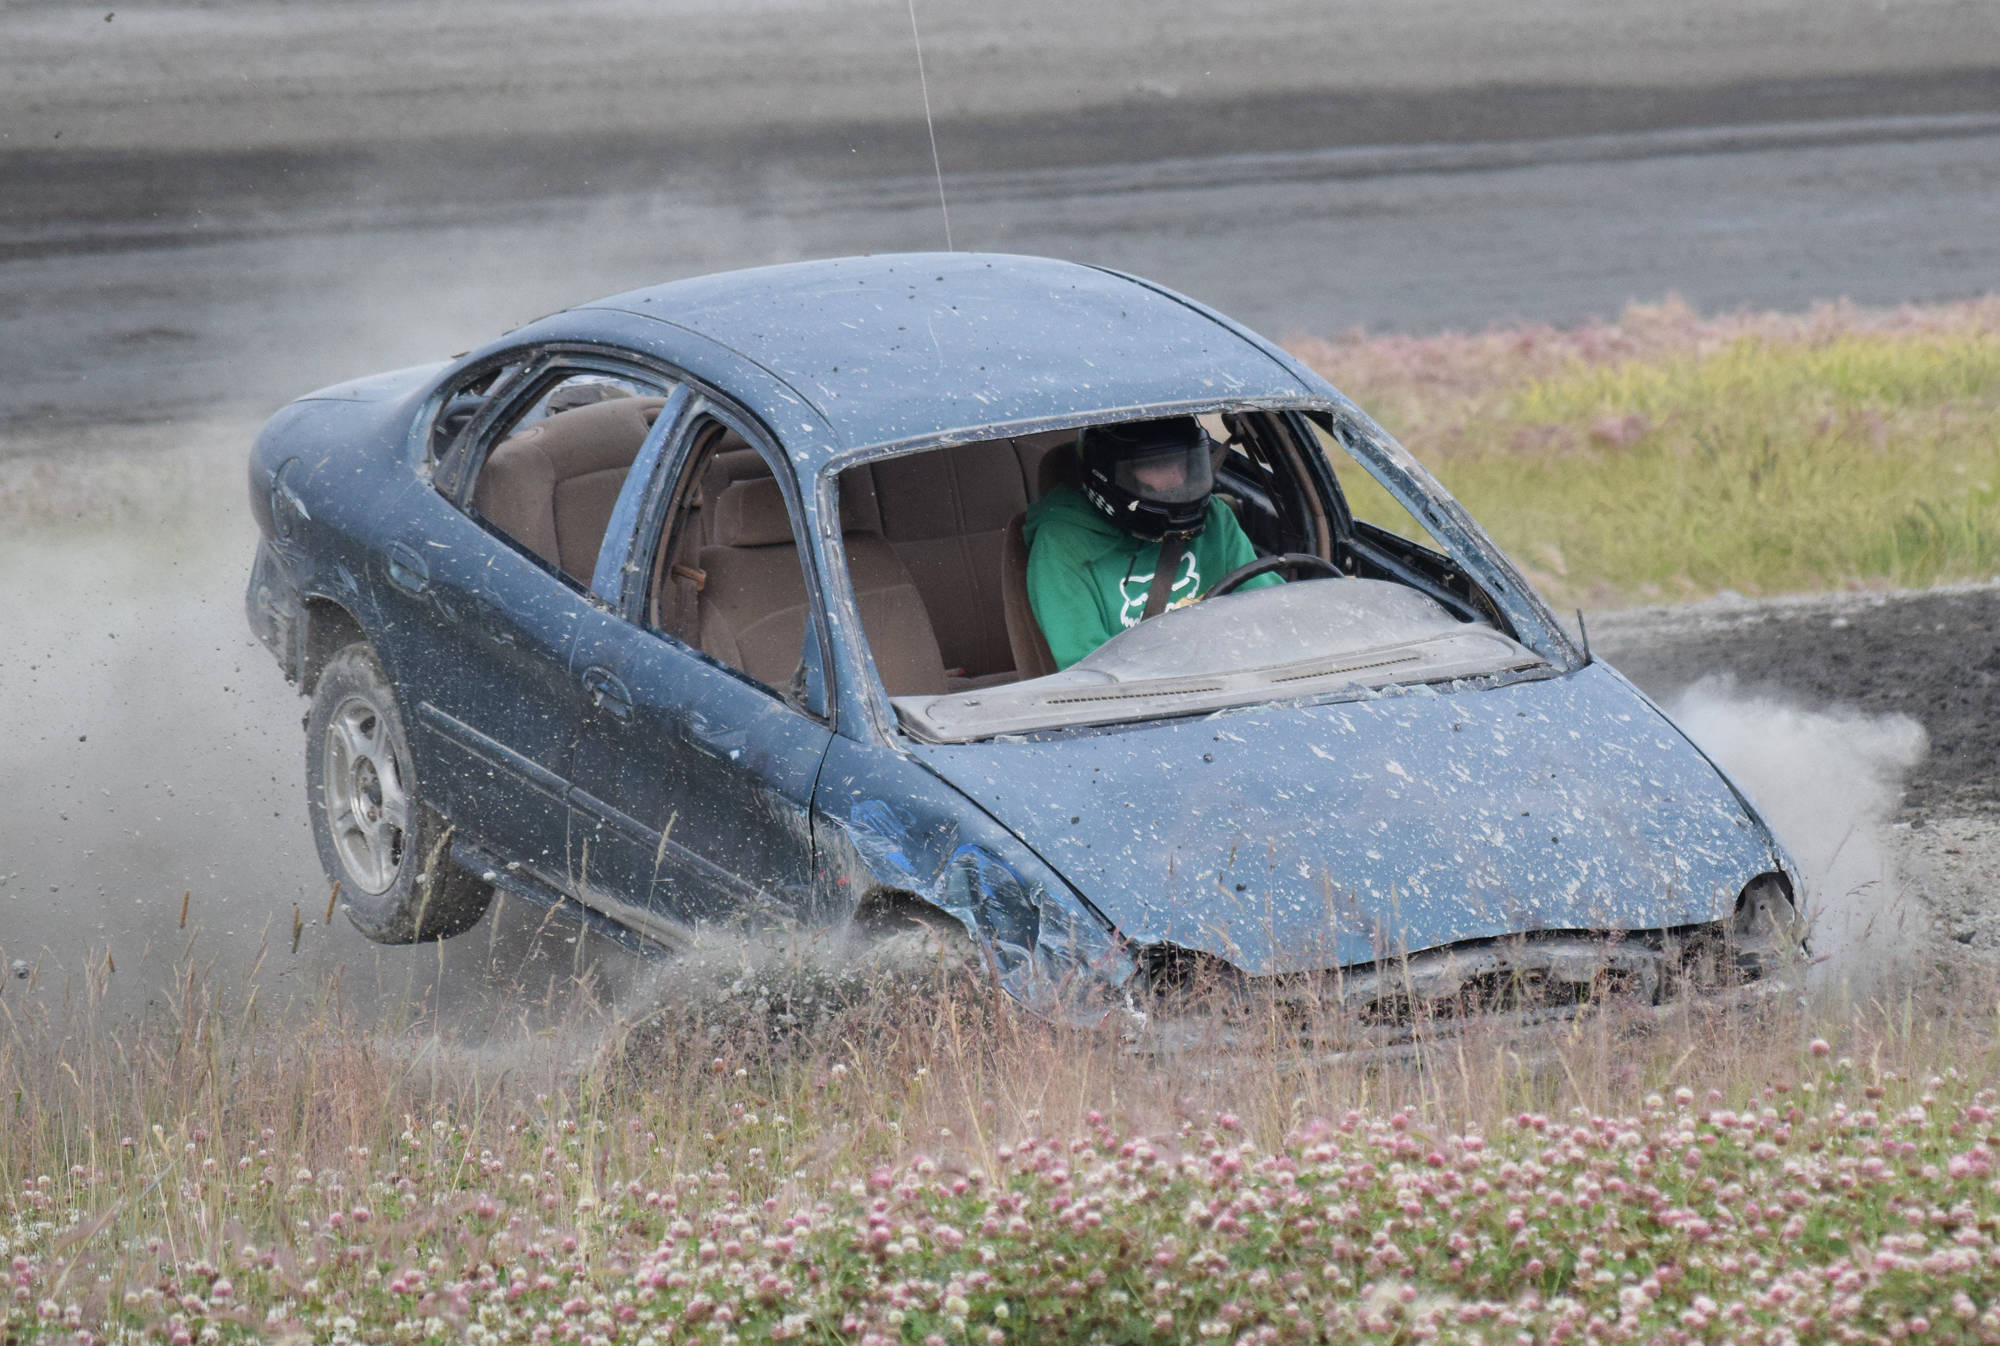 A driver in the Dollar Stock division takes a wild ride Saturday, July 13, 2019, at Twin City Raceway in Kenai, Alaska. (Photo by Joey Klecka/Peninsula Clarion)